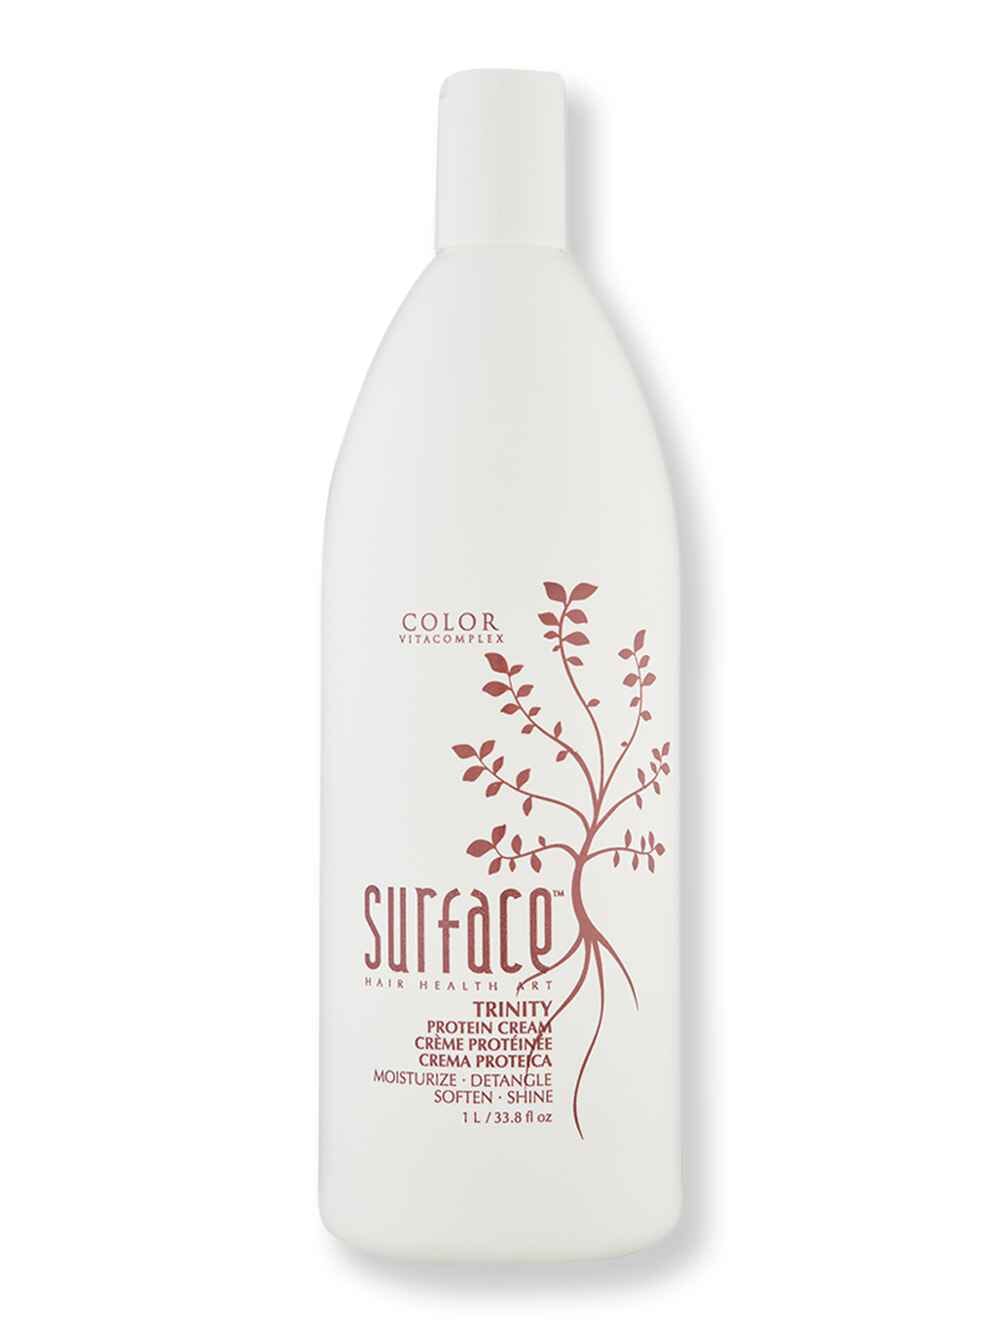 Surface Surface Trinity Protein Cream 1 L Styling Treatments 